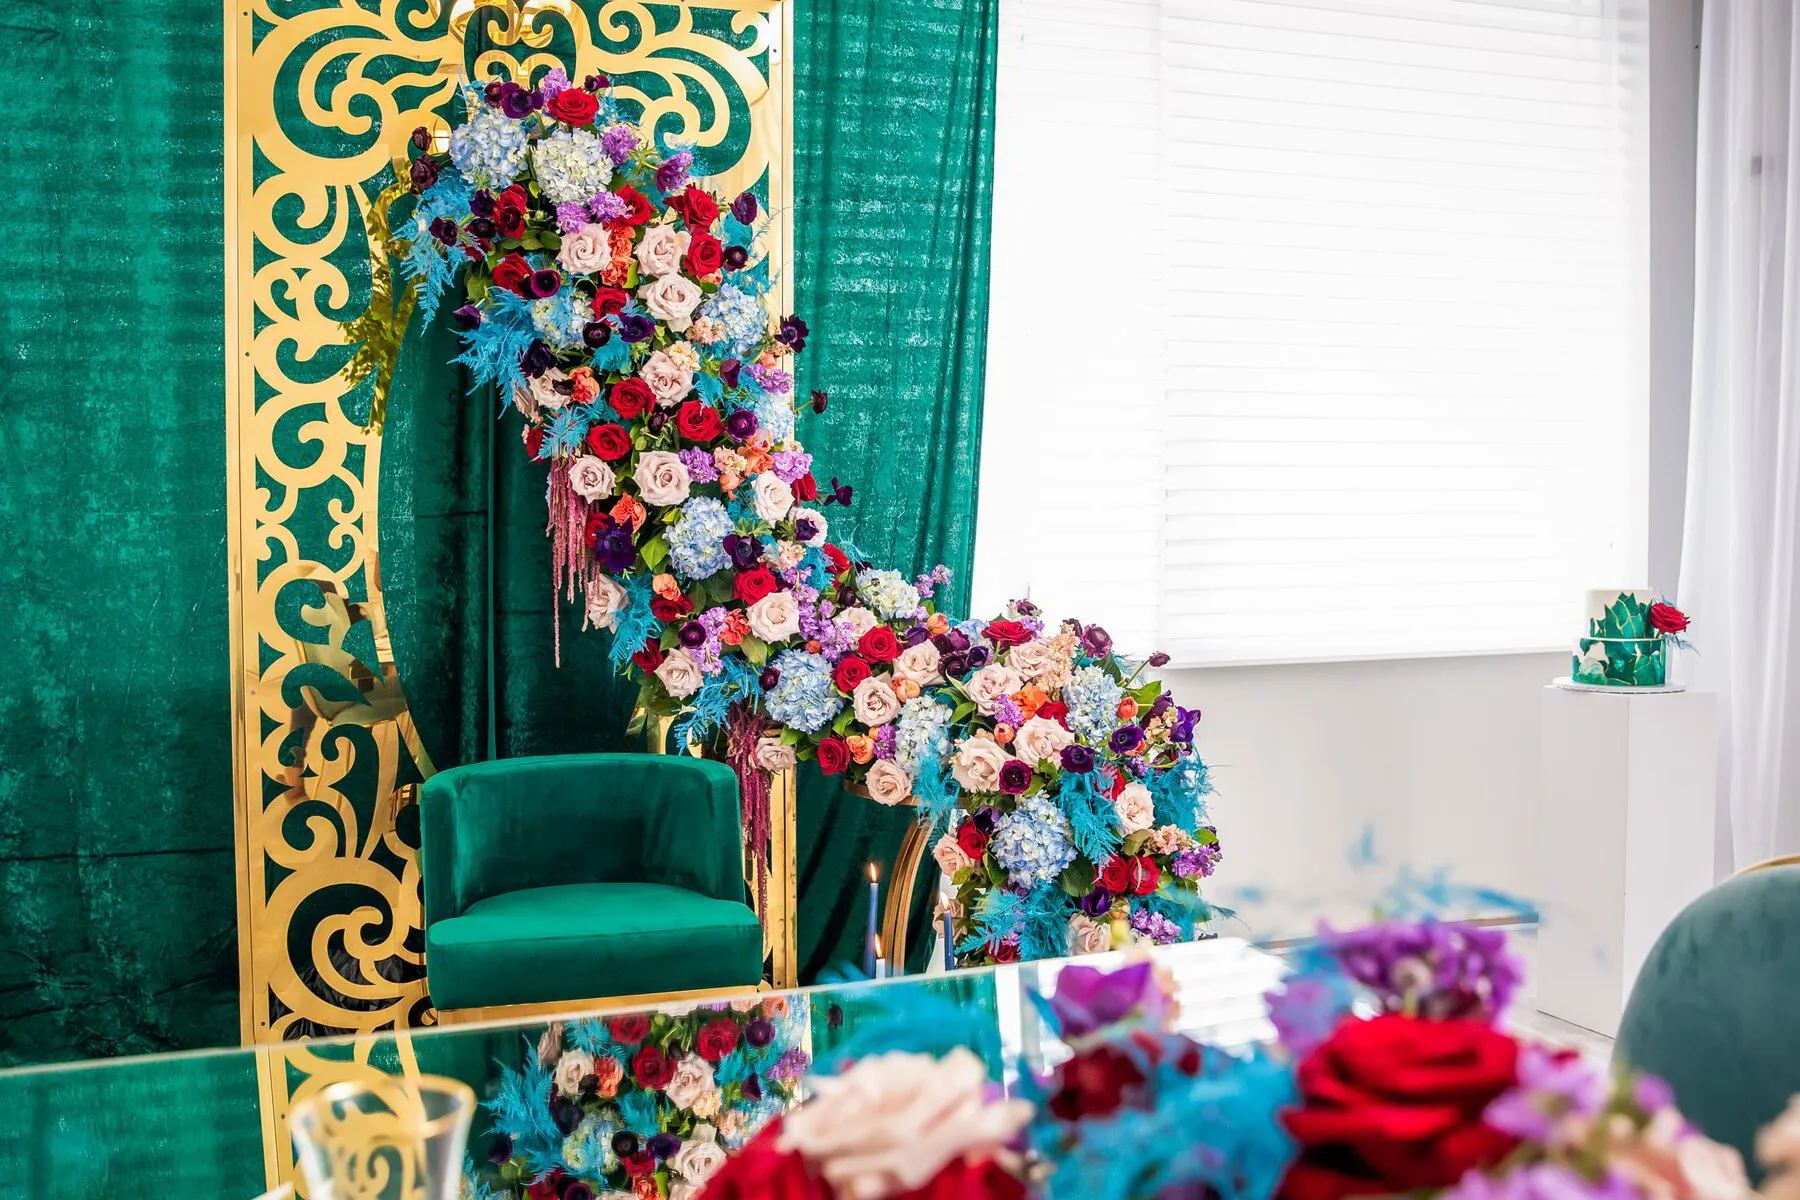 Gold Arabian Stand with Colorful Flowers Backdrop: (Video) 